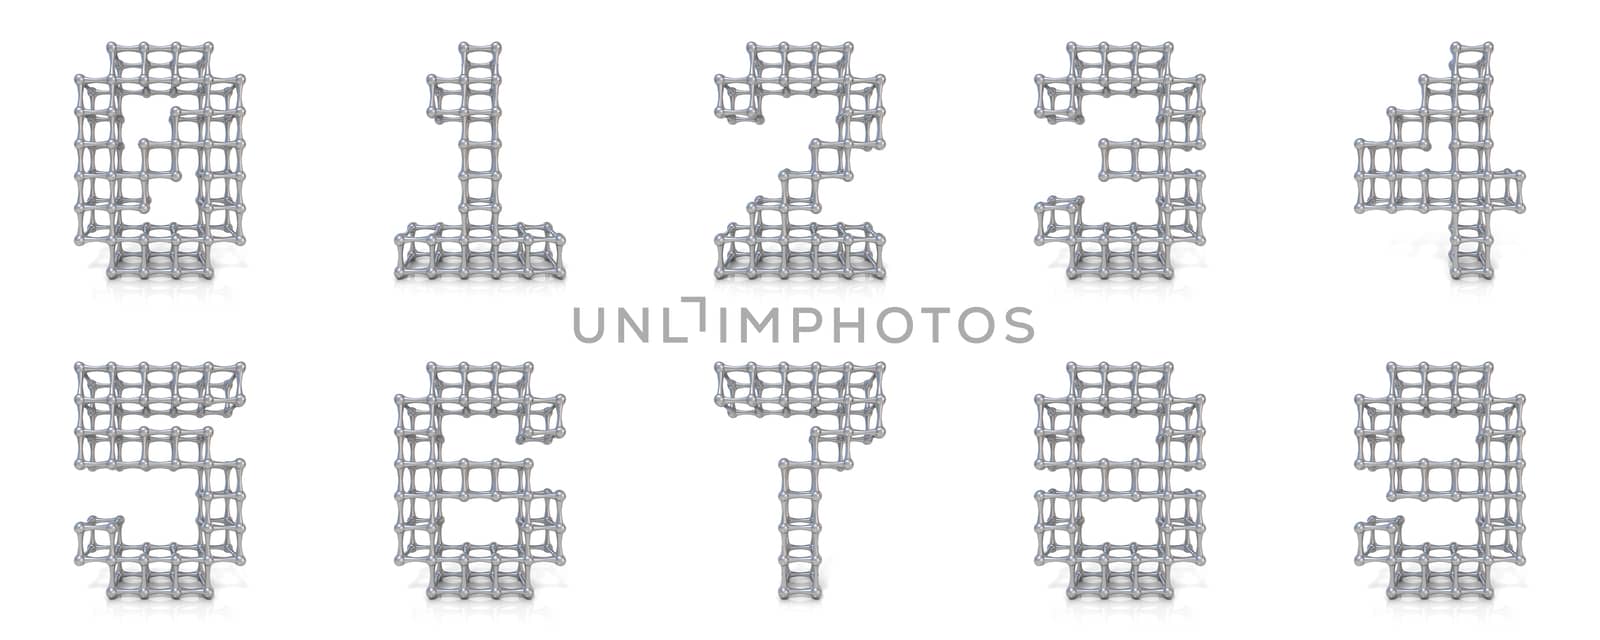 Metal lattice digits collection 3D render illustration isolated on white background